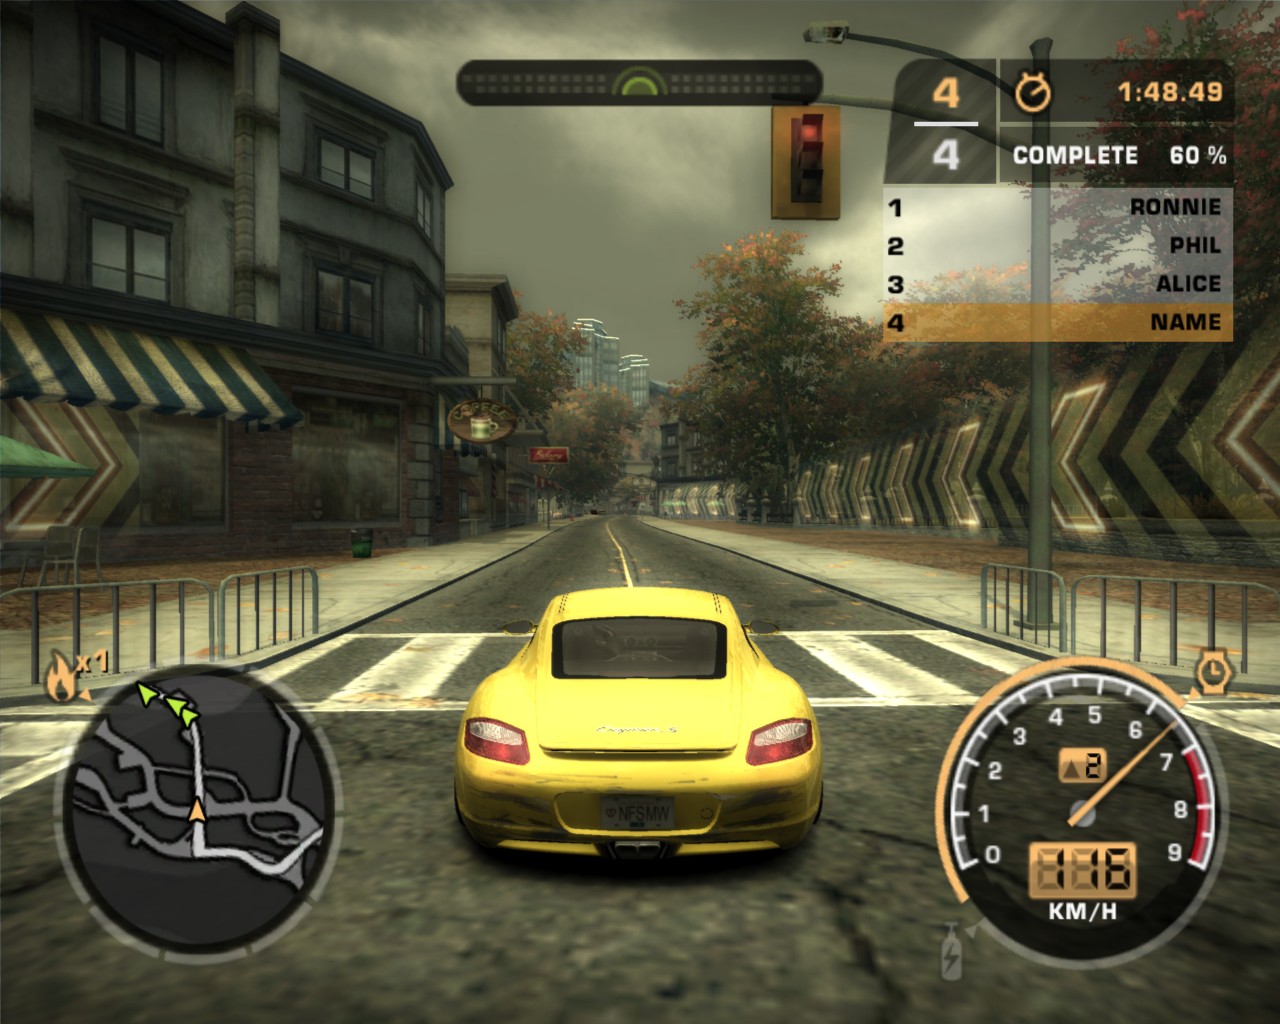 Download Need For Speed Most Wanted ROM ✓ for GameCube and Need For...